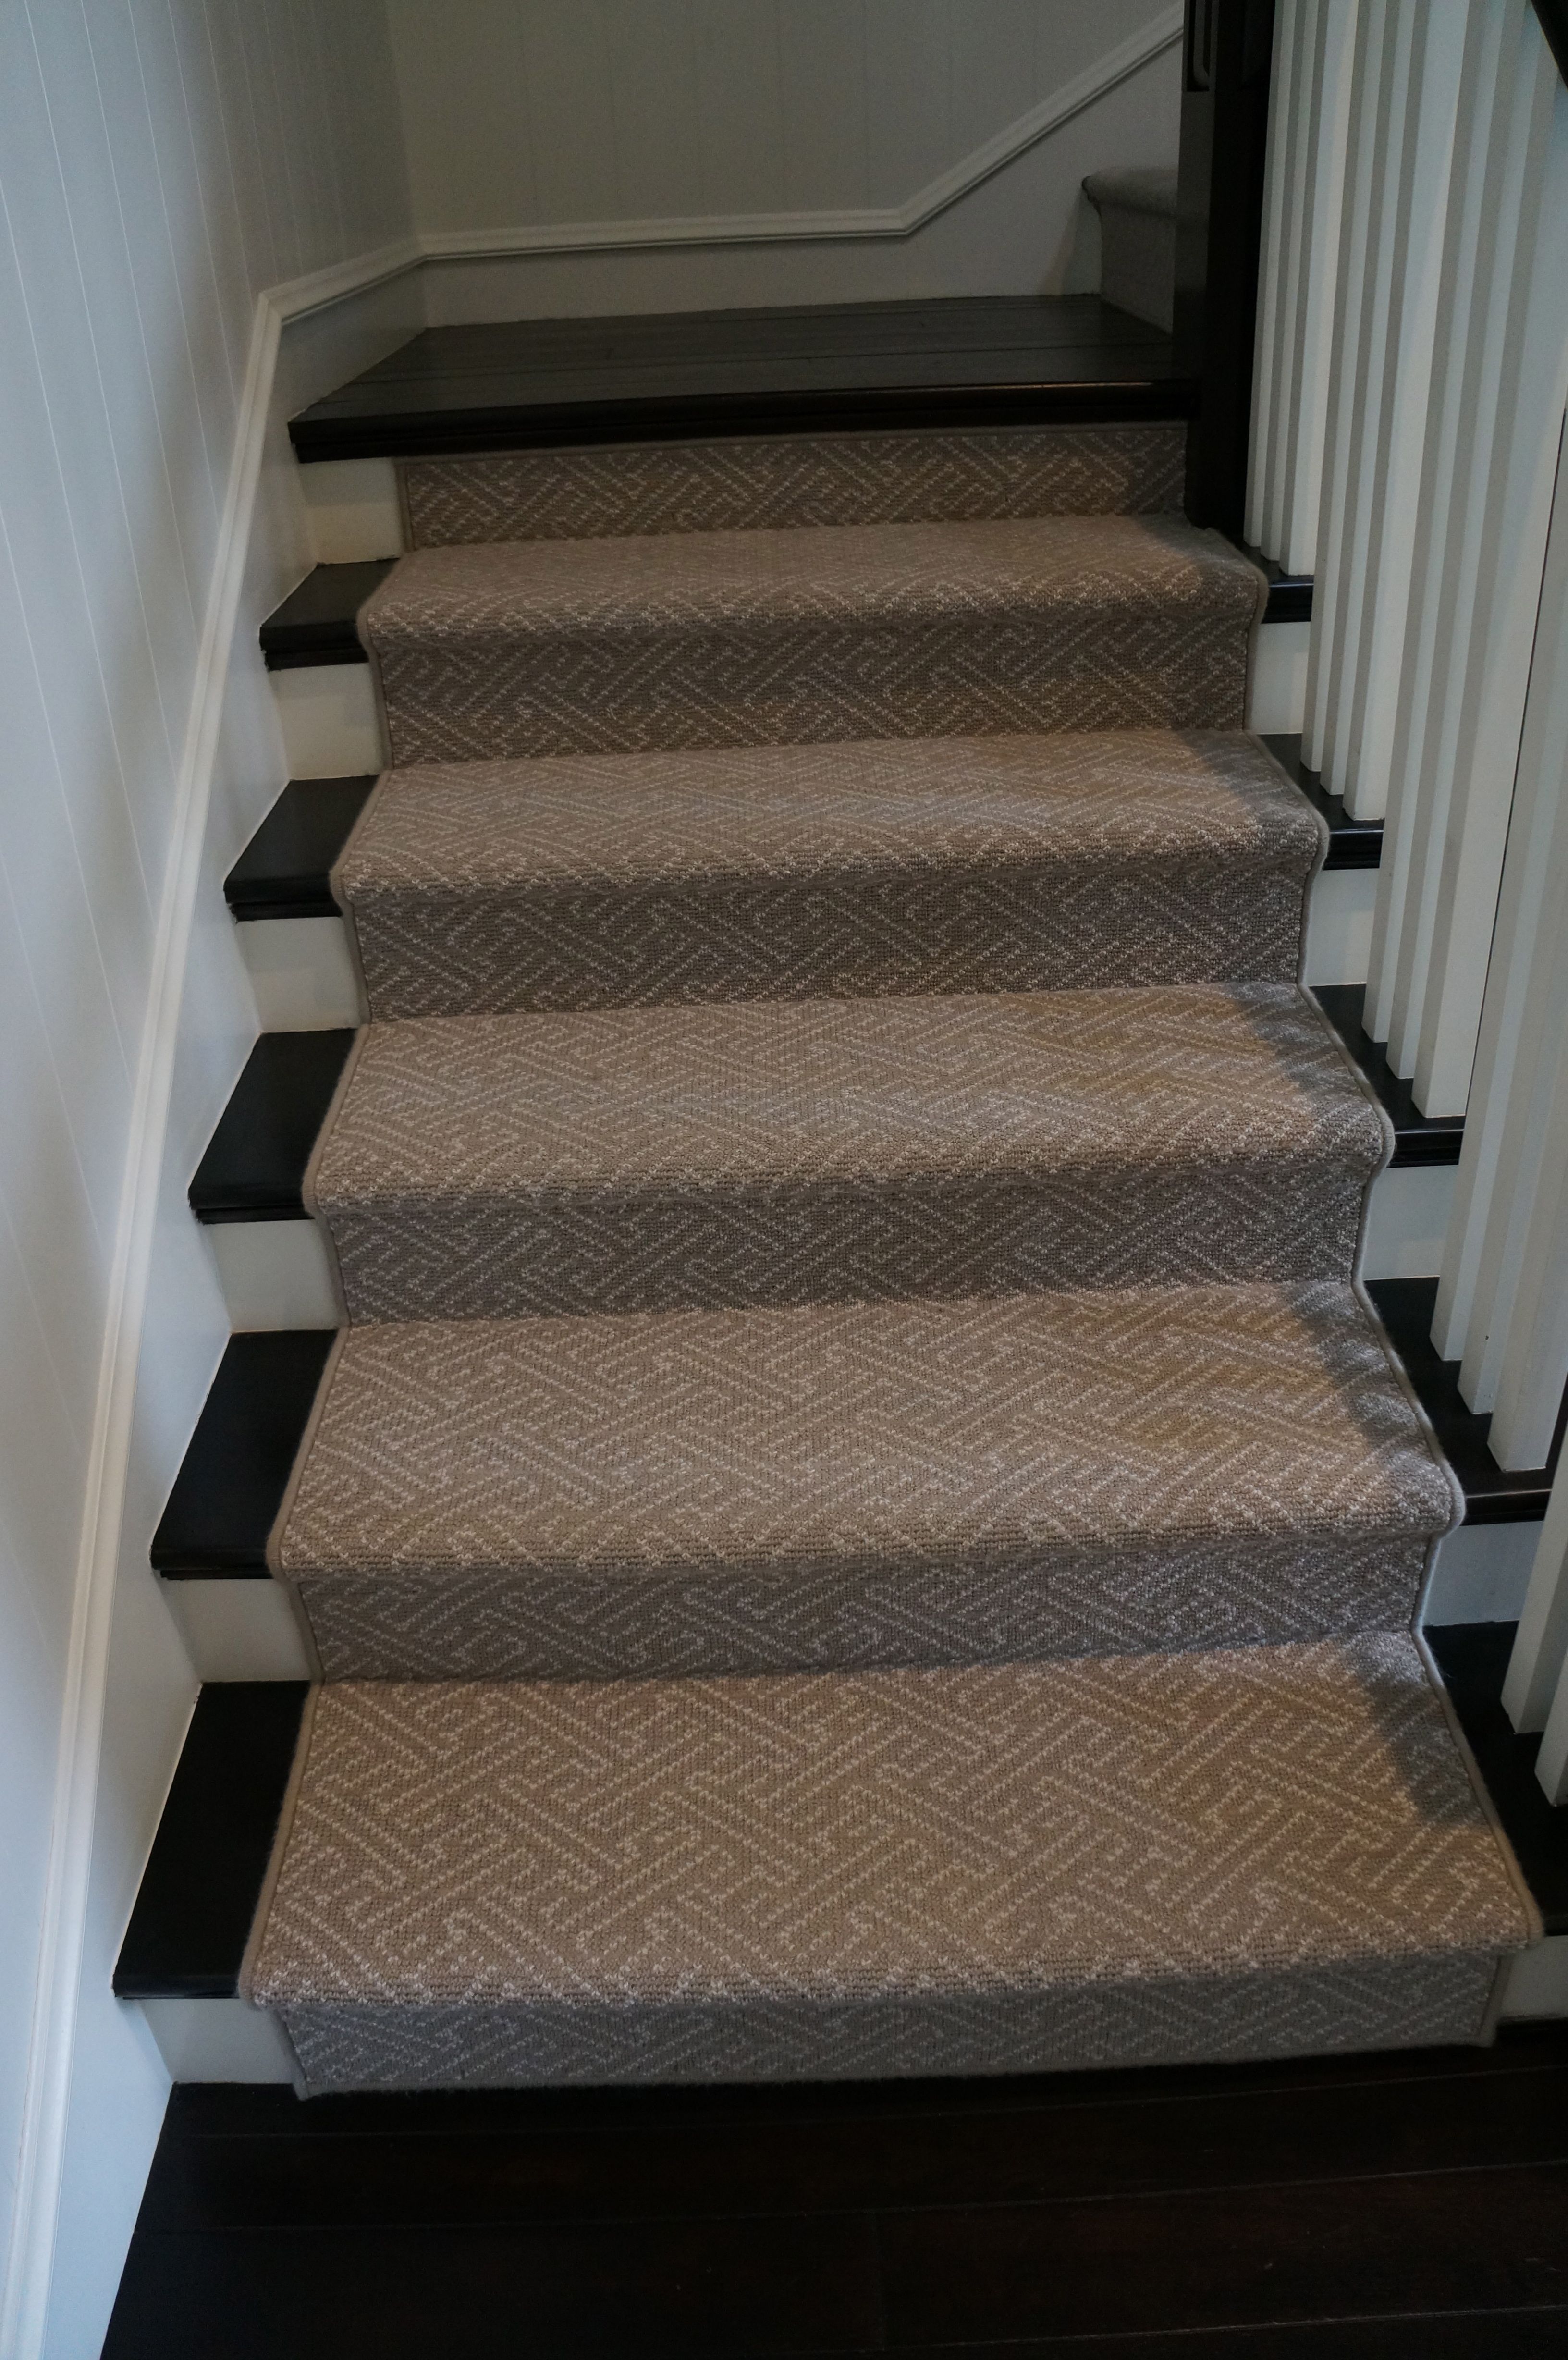 Striped Carpet Runner For Stairs With Black Stair Treads And Inside Wool Stair Rug Treads (View 13 of 15)